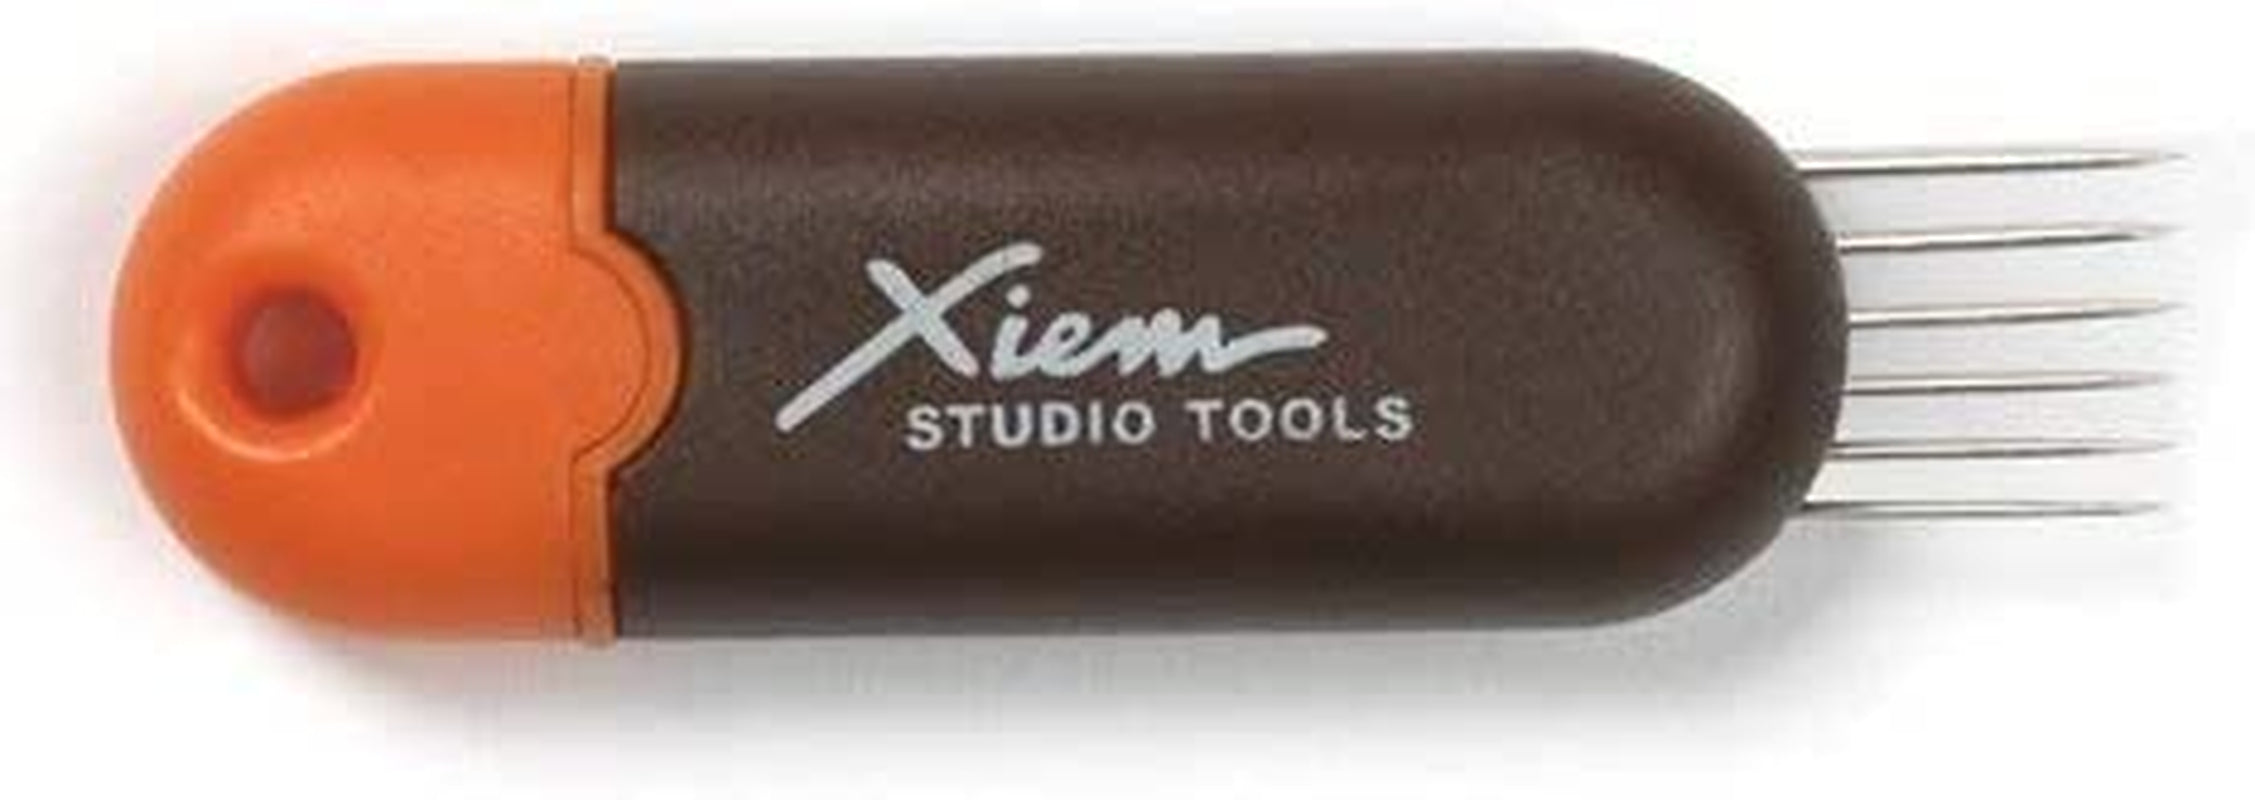 Xiem Studio Tools Ultimate Tools for Clay Artists (Carving Tools)